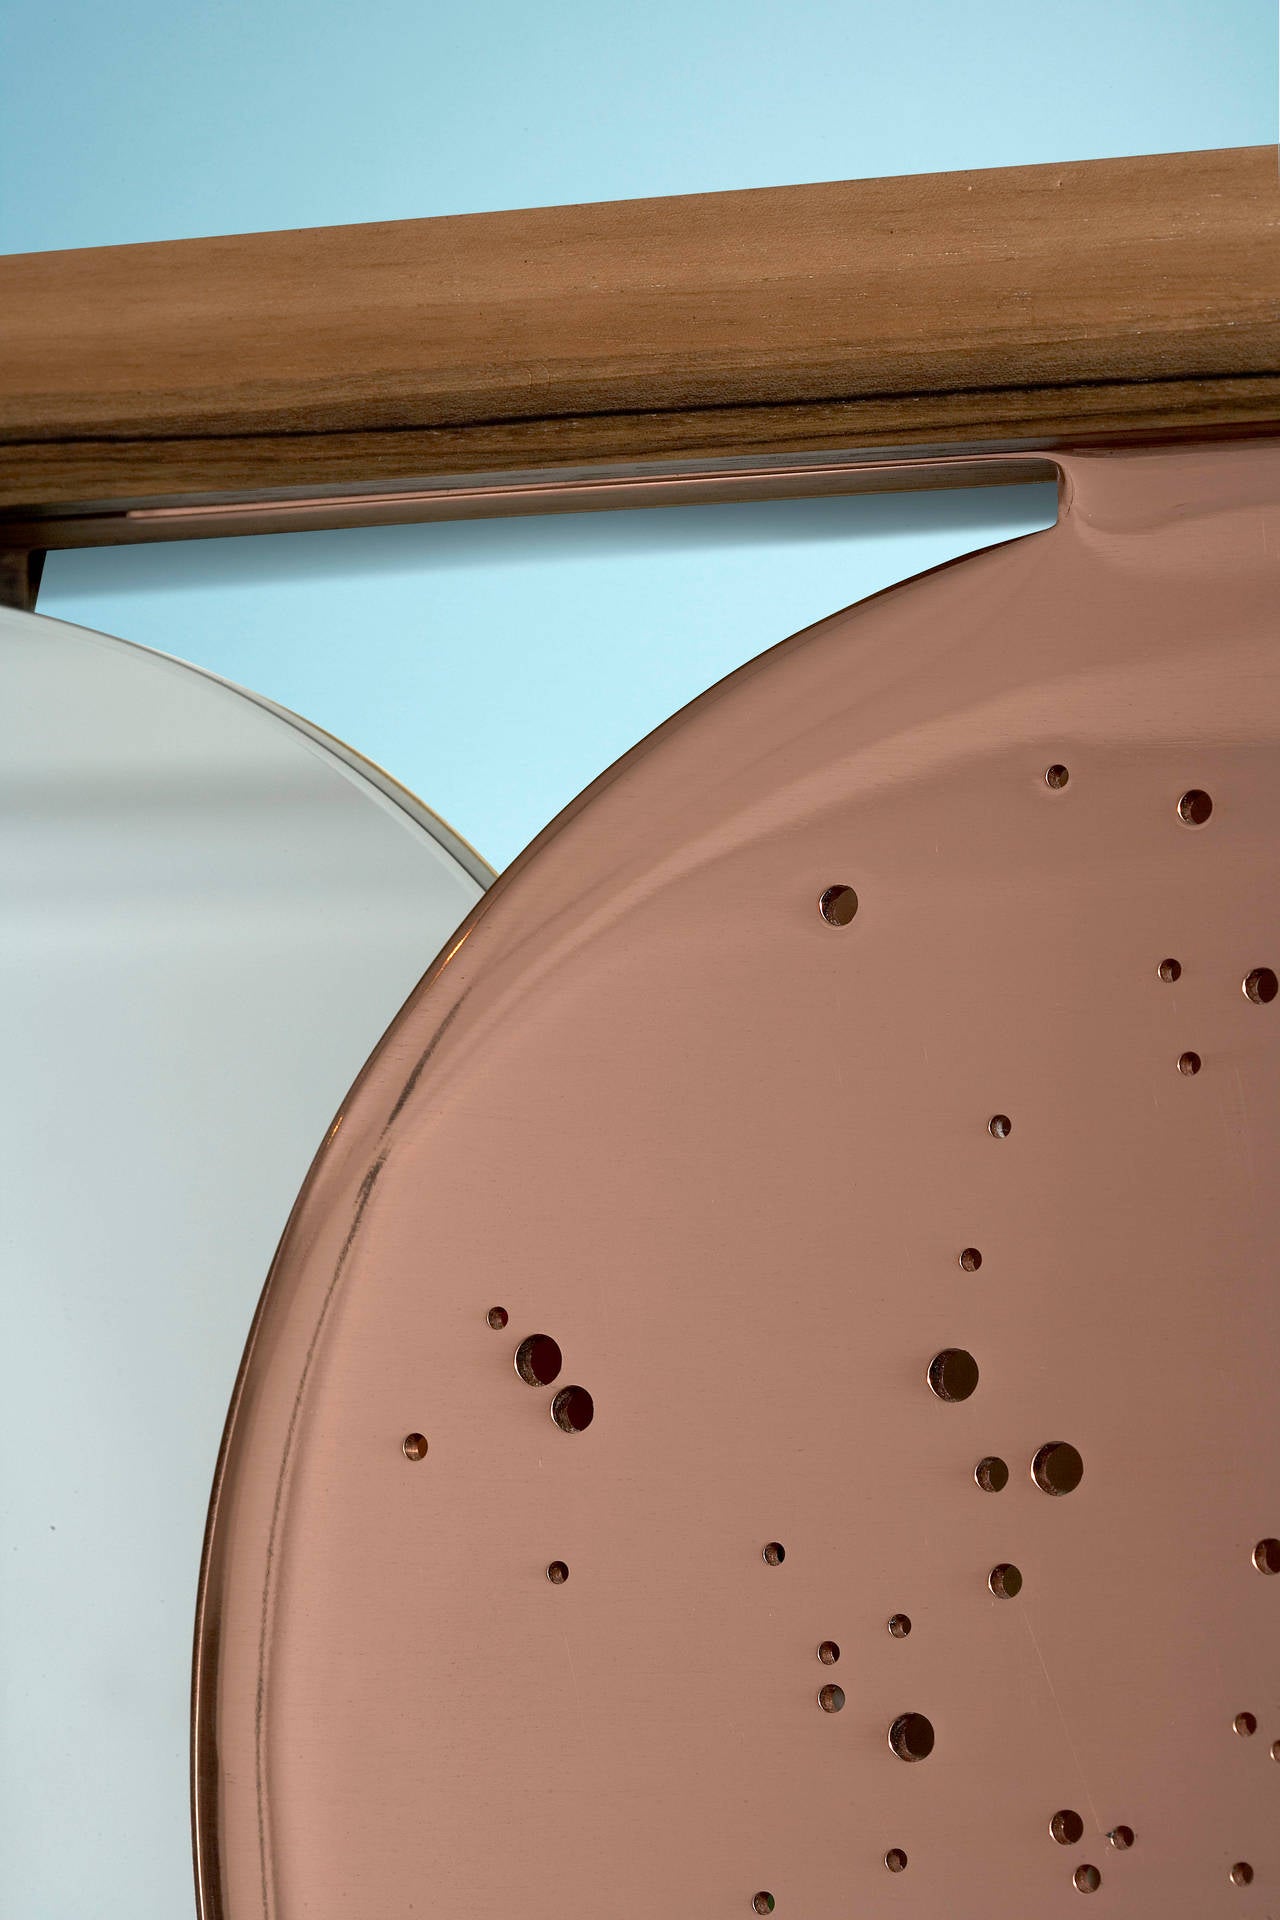 Eclipse
Mirror. 
Cat-Berro edition 2007
Red copper. Solid walnut.
The copper part slides on the mirror.
Measure: L 64 cm, H 27.5 cm, épaisseur 2.5 cm.

Signed piece of a limited edition of 24 + 2 AP + 2P.
Delivery time: 8 weeks.

Pricing does not